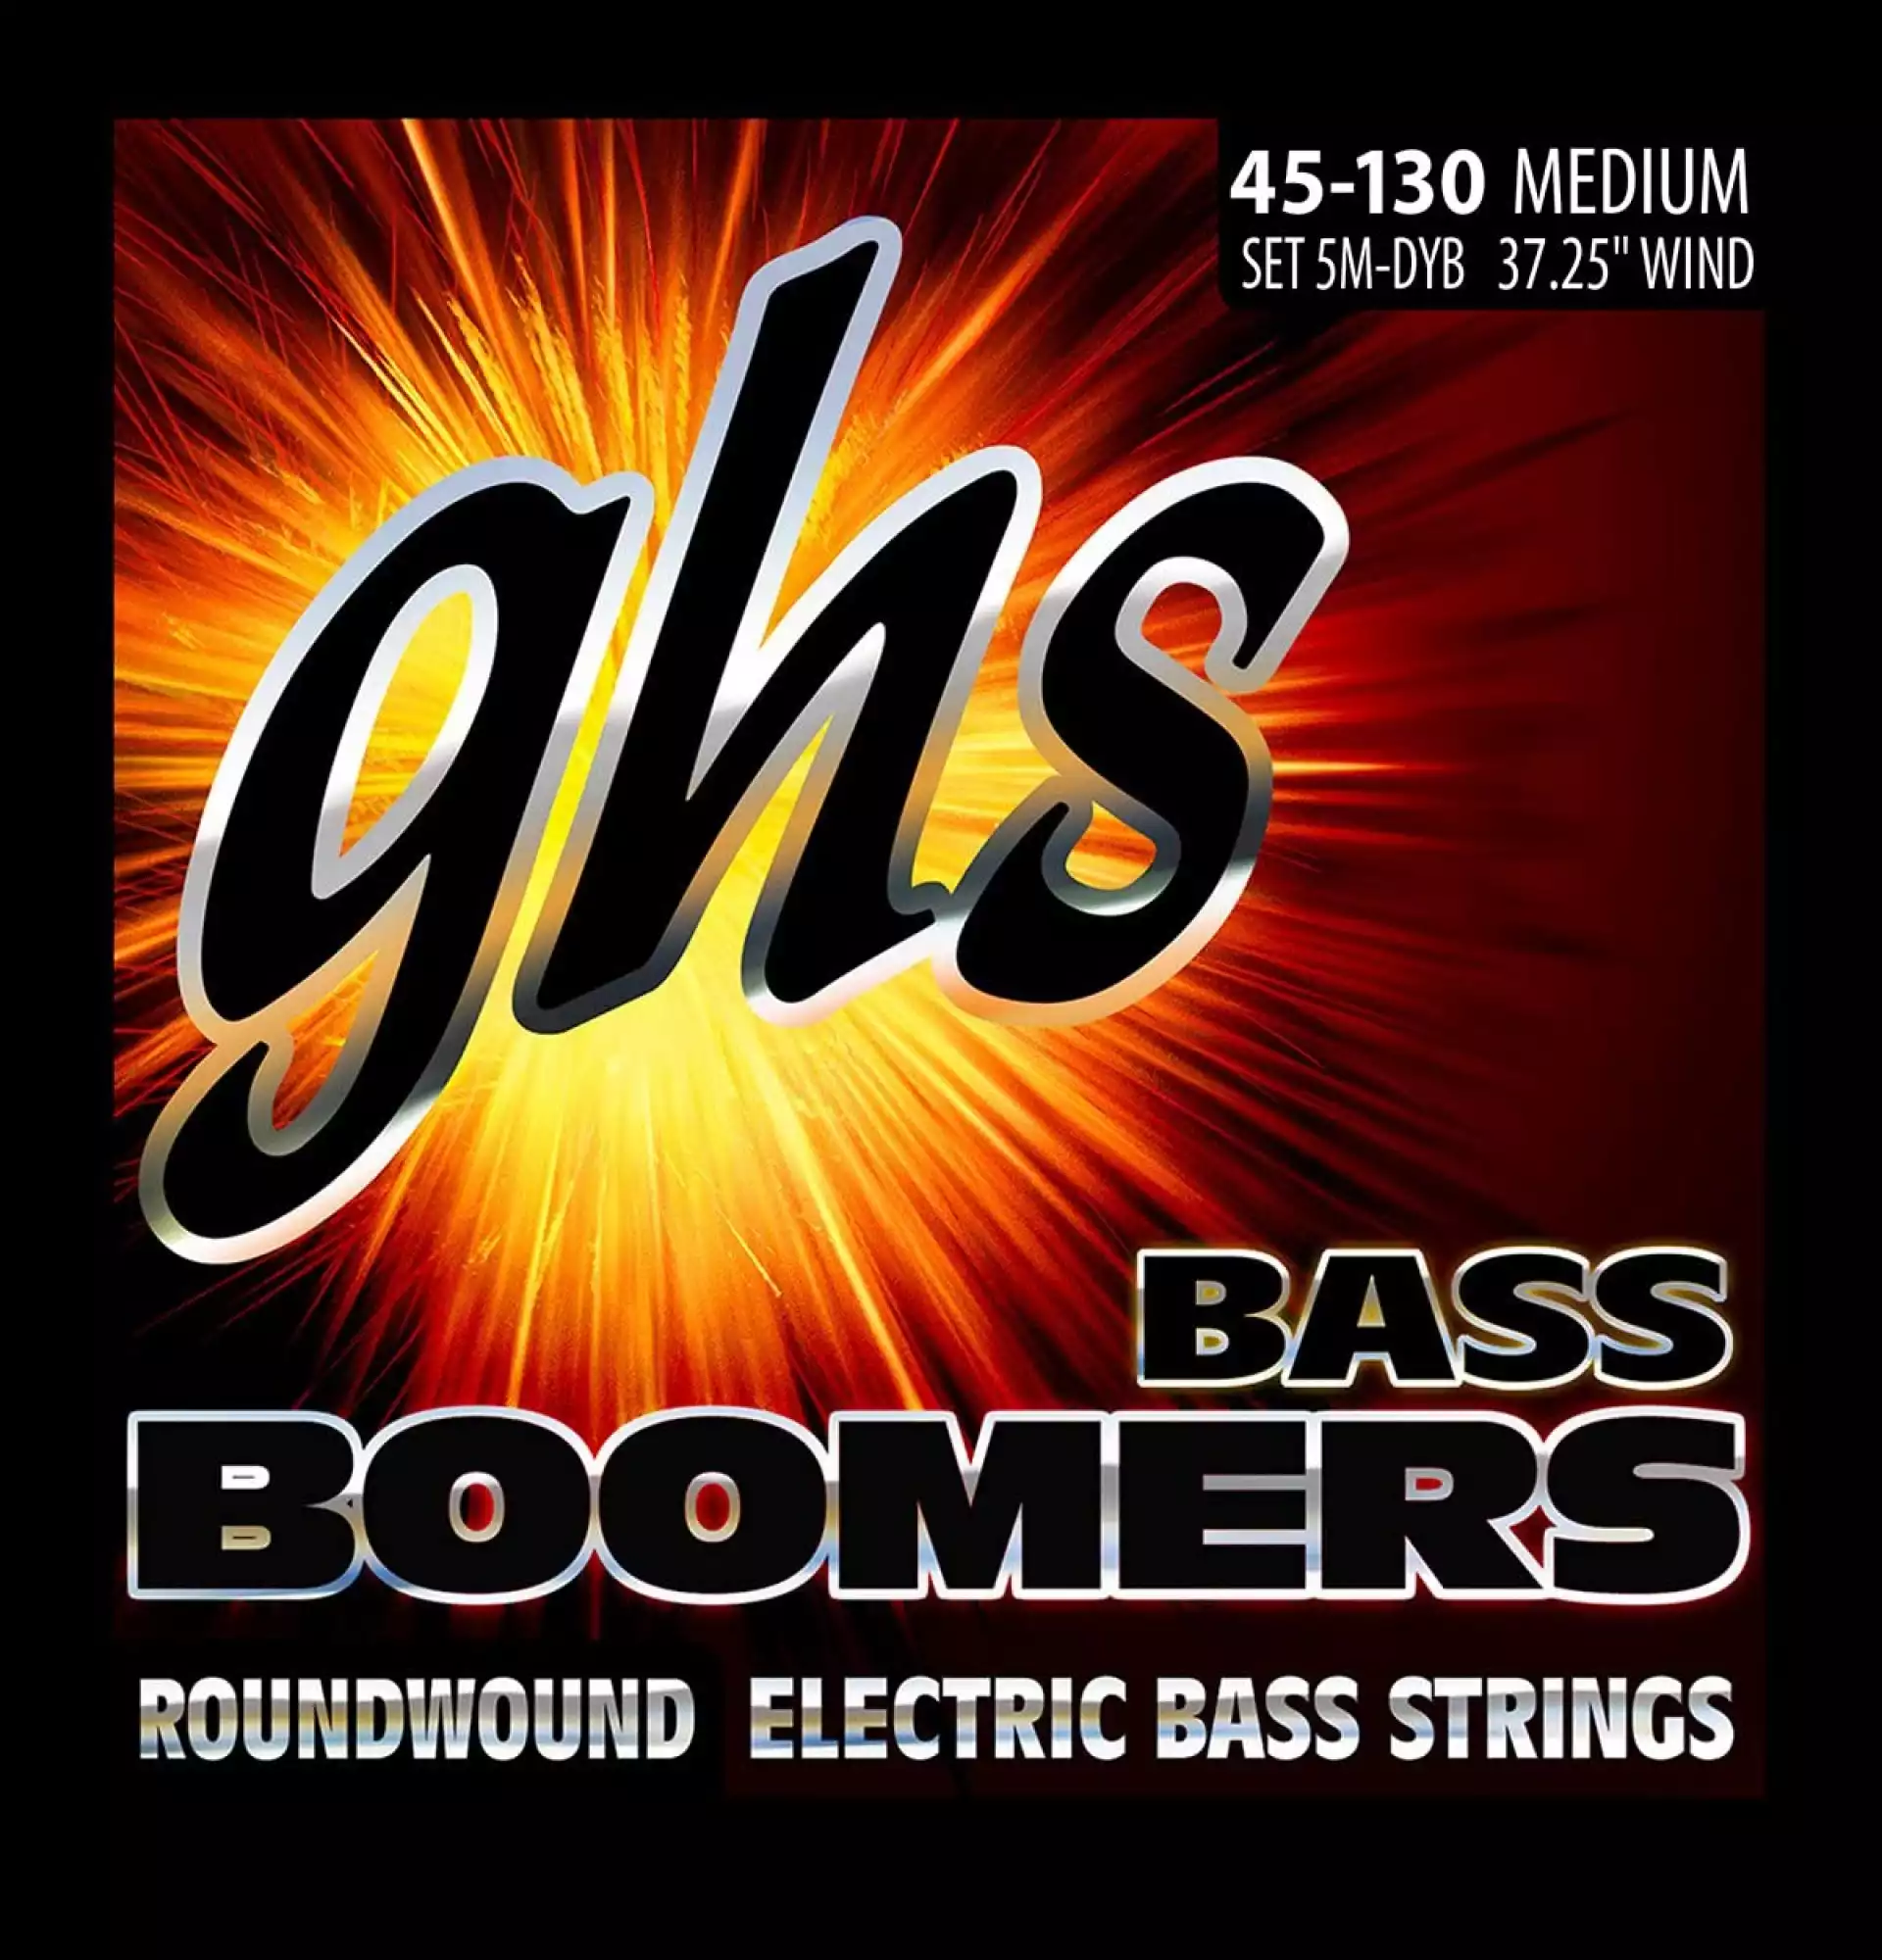 GHS 5M-DYB Medium Bass Boomers Roundwound Electric Bass Strings (5-String Set, Long Scale, 45 - 130)